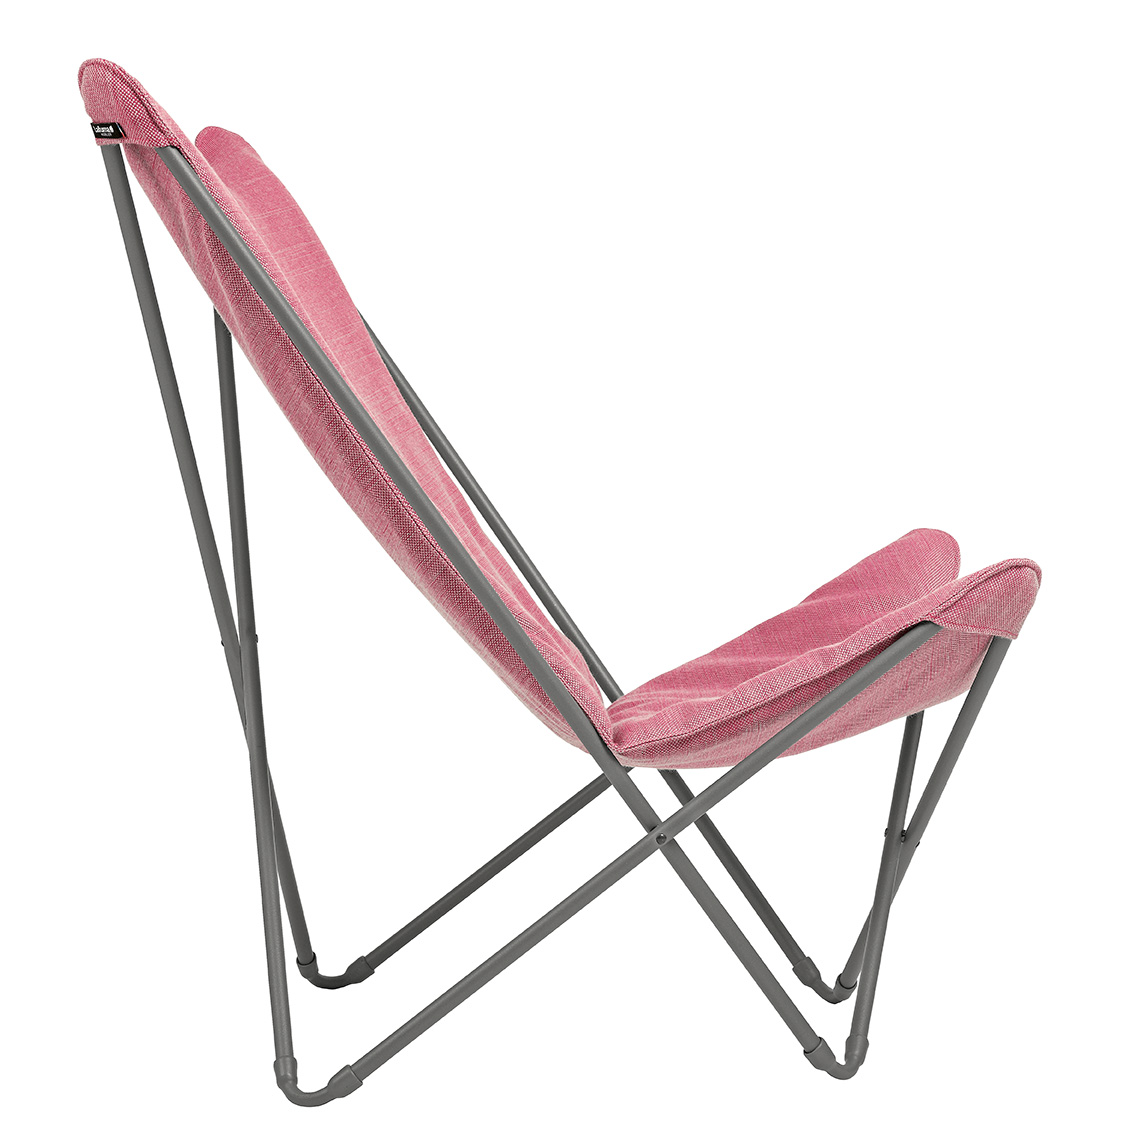 Lounge Chair - Titane Steel Frame - Orchid Hedona Fabric